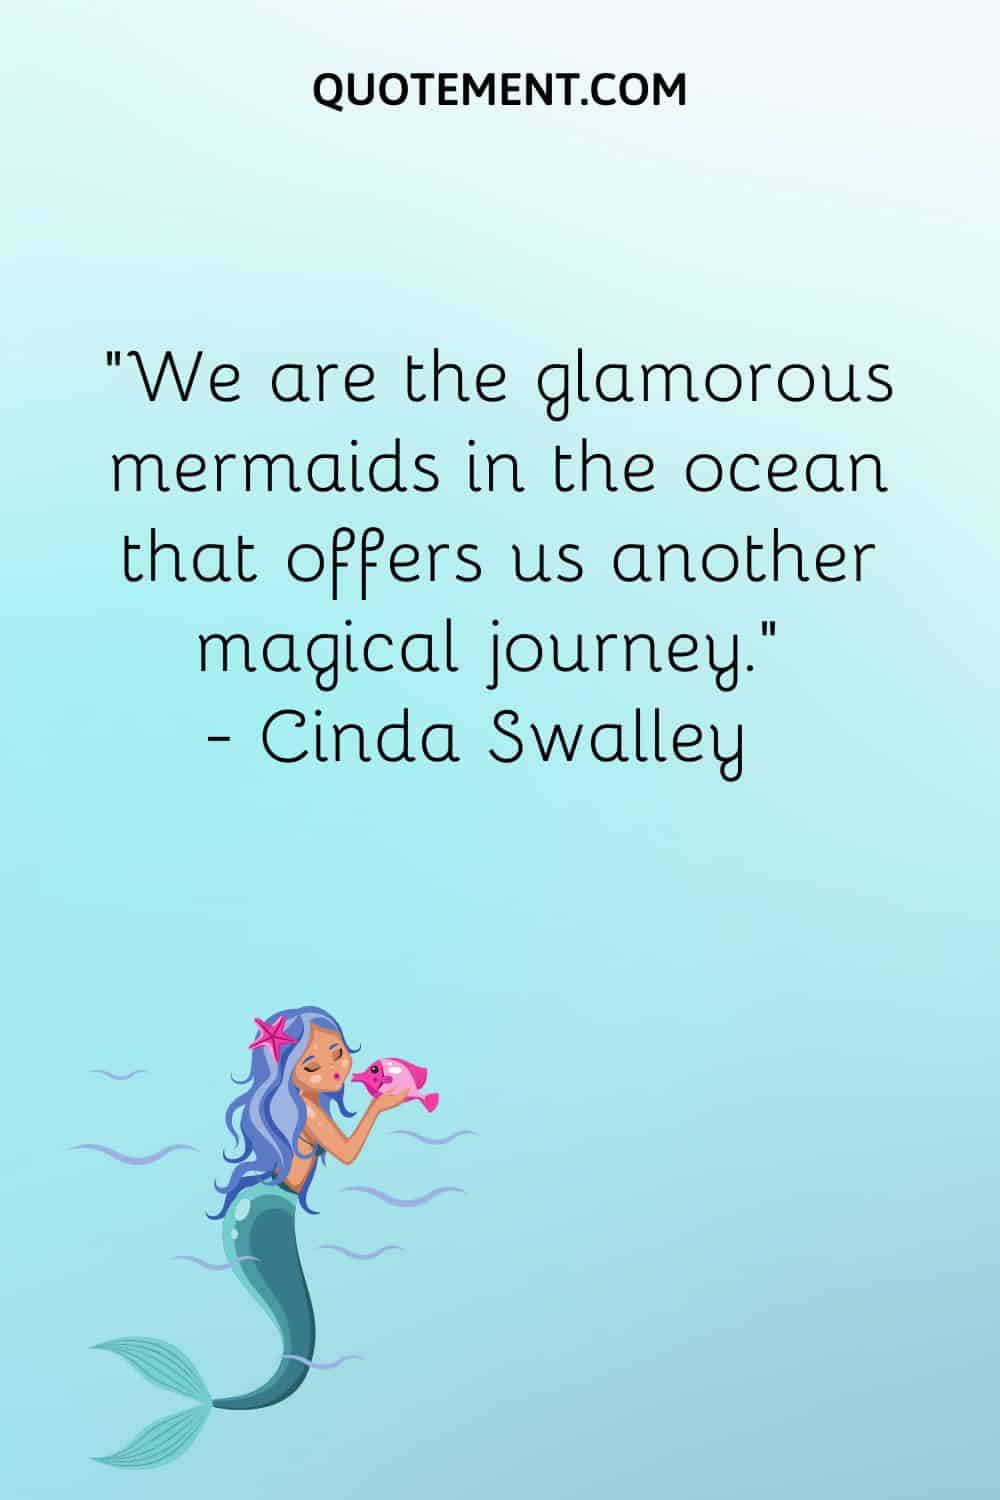 “We are the glamorous mermaids in the ocean that offers us another magical journey.” — Cinda Swalley